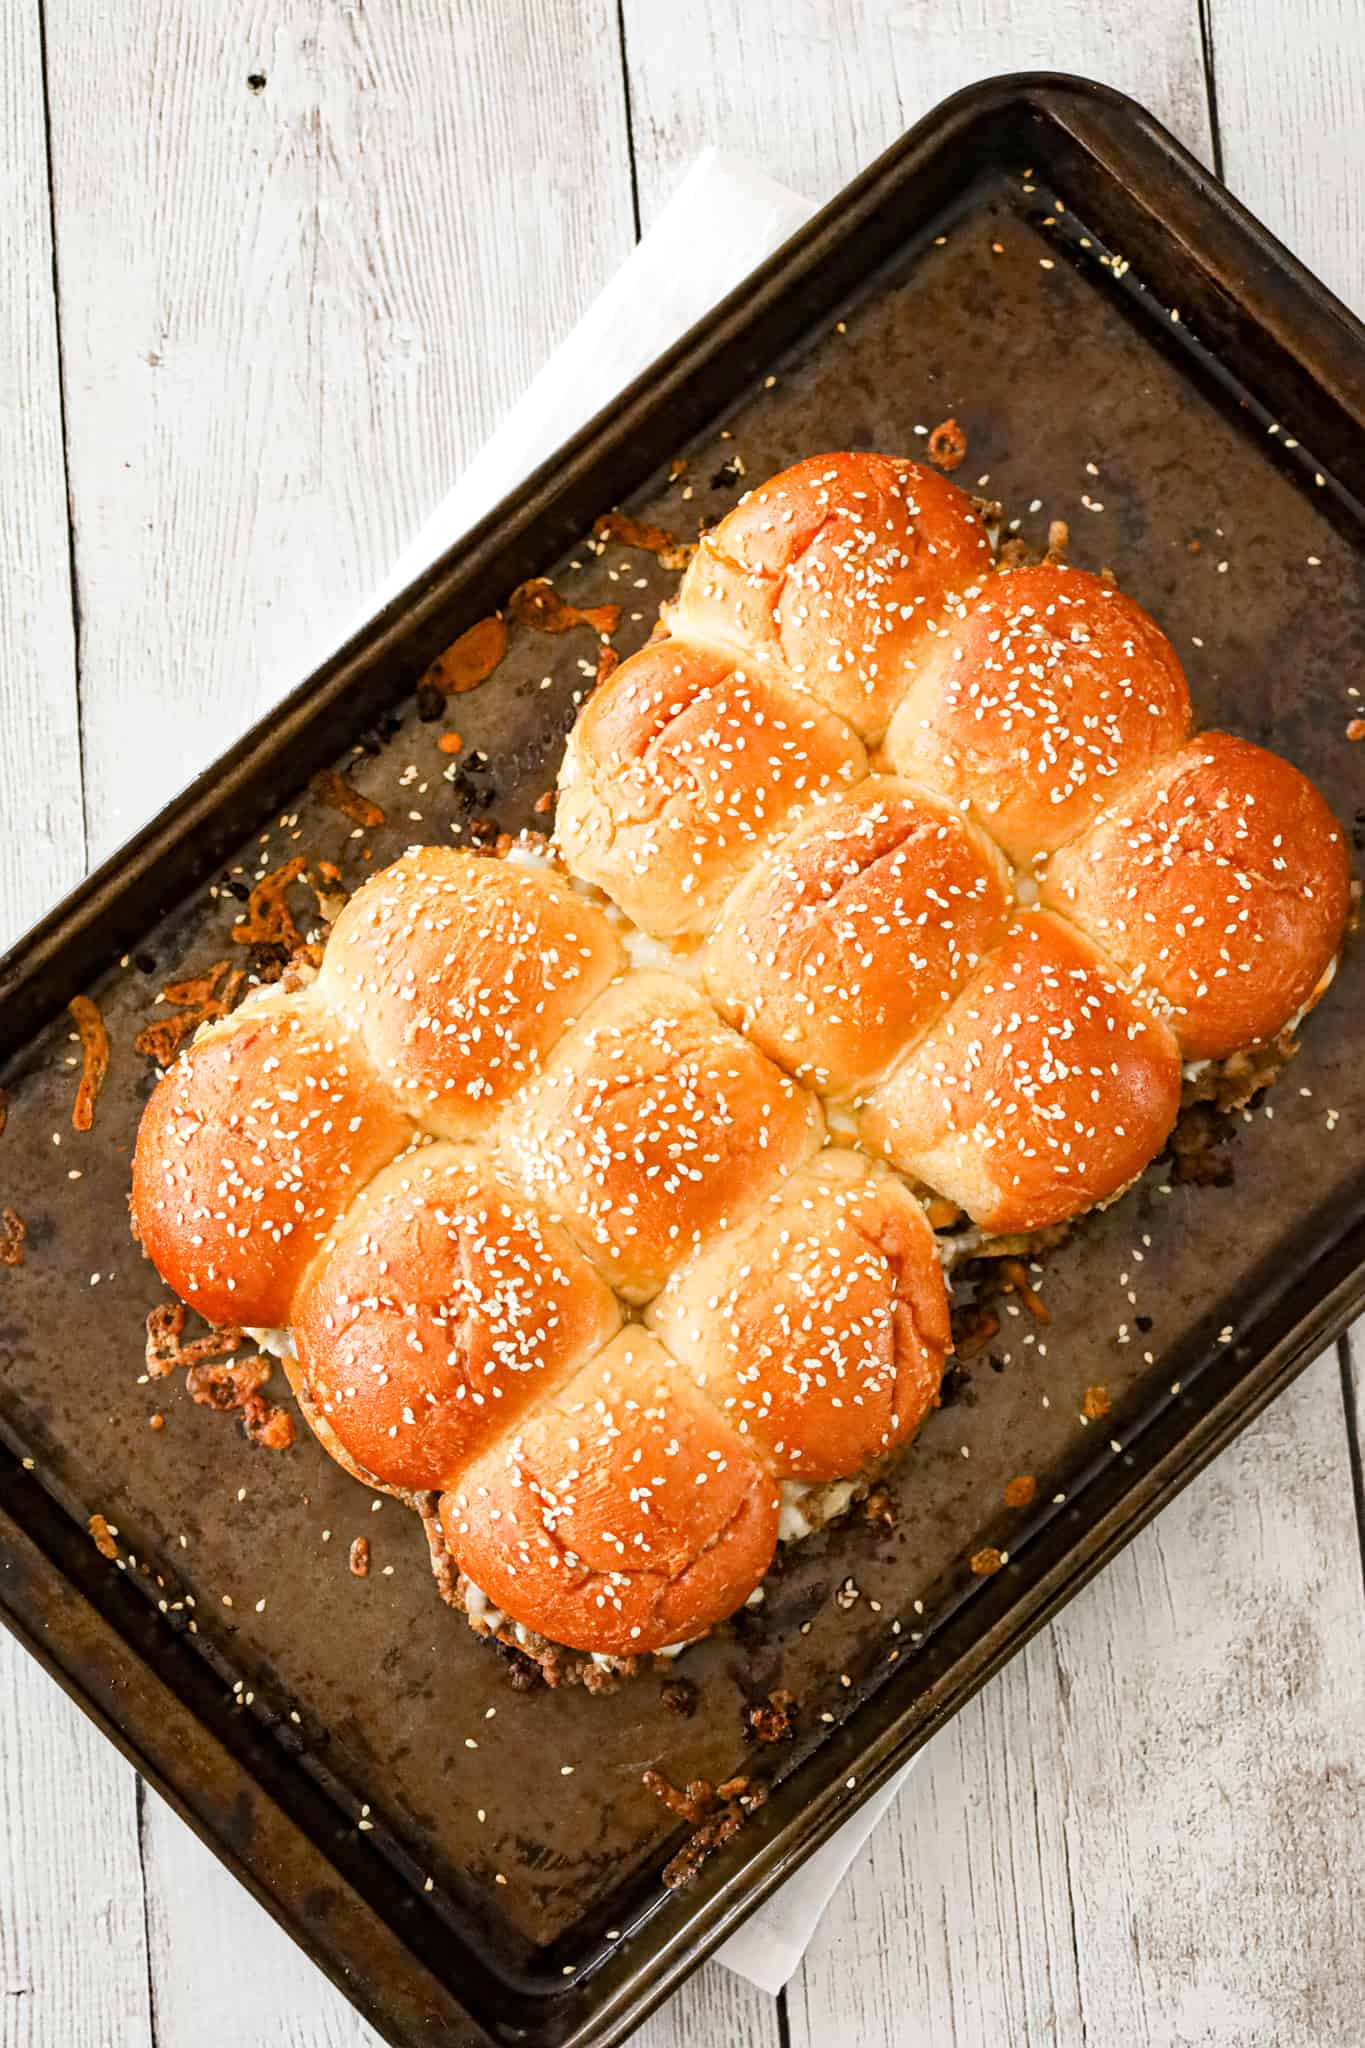 Cheeseburger Sliders are mini sandwiches made with crumbled ground beef and diced onions tossed in ketchup, mayo and mustard all loaded onto dinner rolls and topped with shredded cheese.